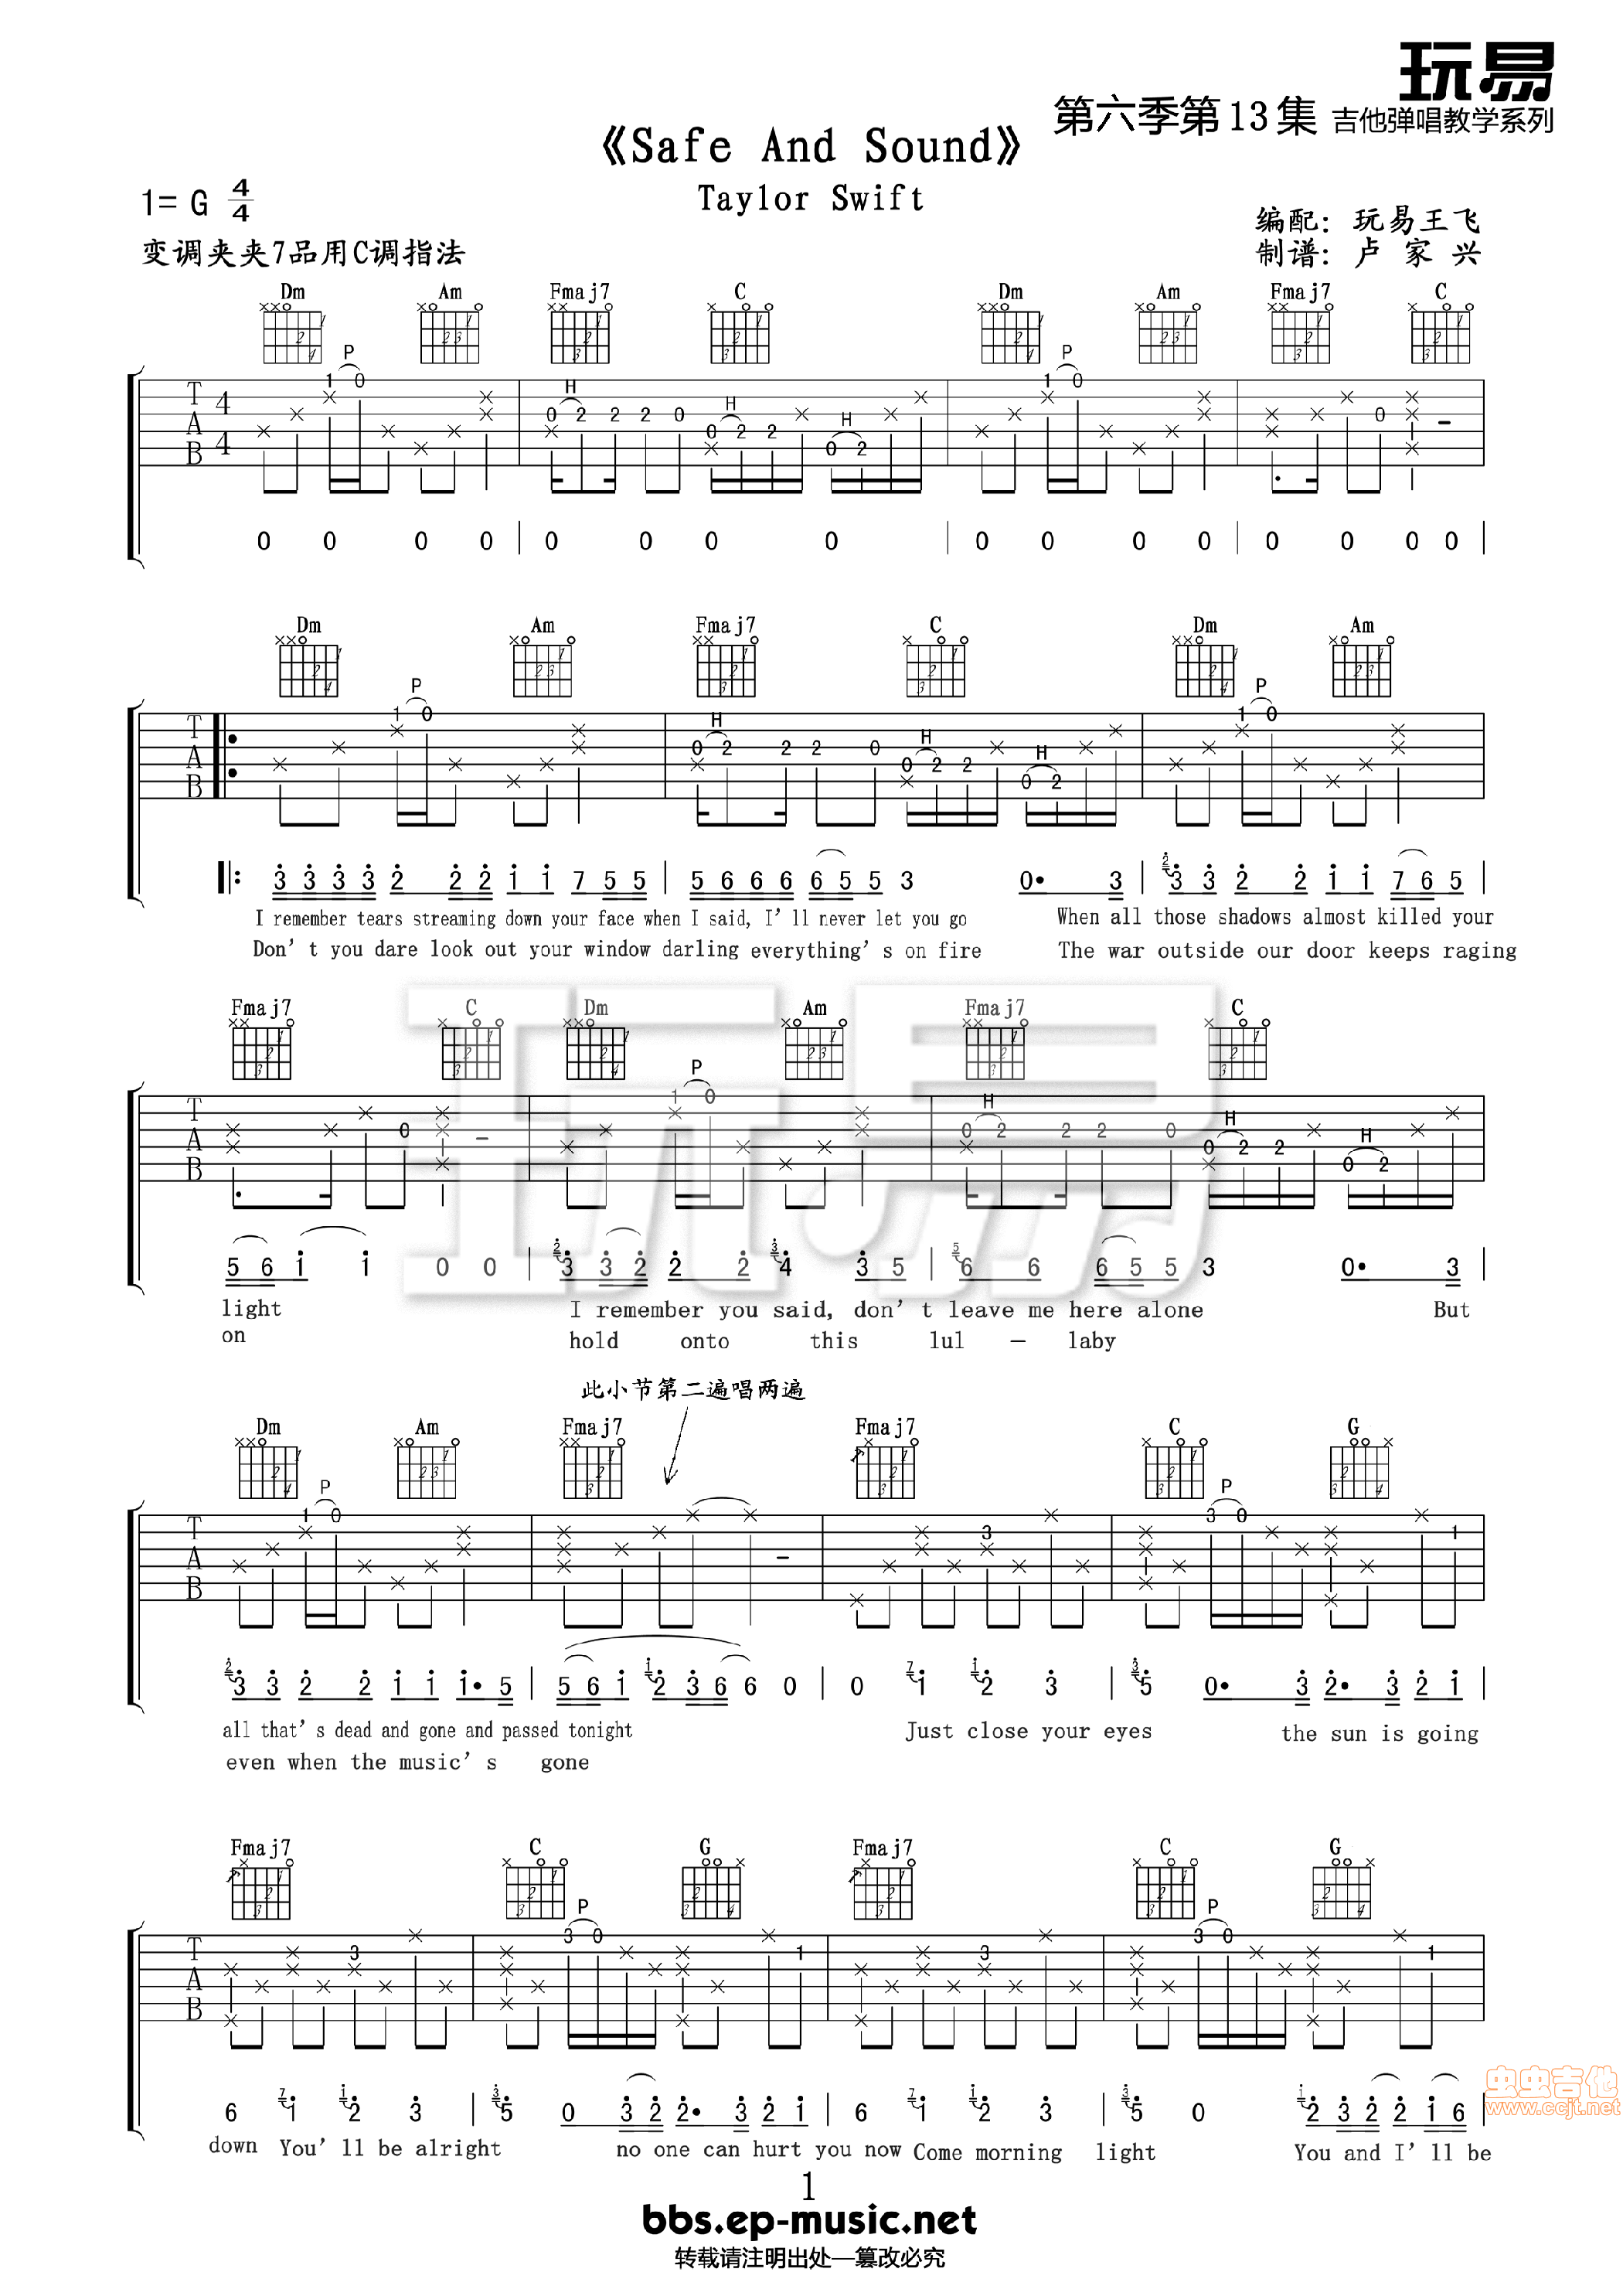 guitar chords for safe and sound